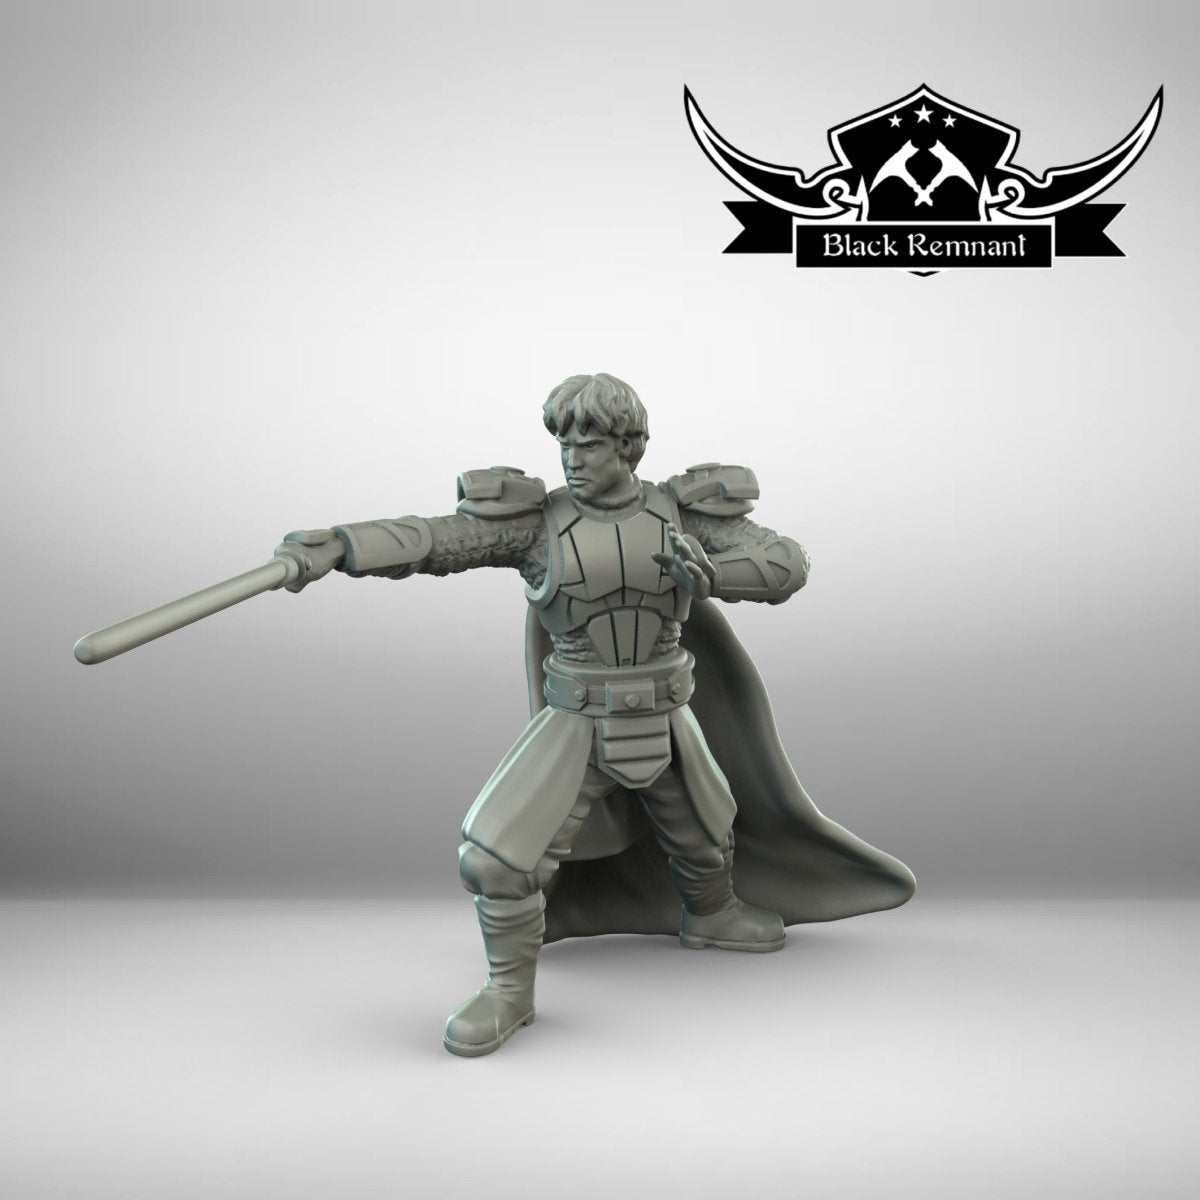 Authority Red Knight Leader Draco - SW Legion Compatible Miniature (38-40mm tall) High Quality 8k Resin 3D Print - Black Remnant - Gootzy Gaming